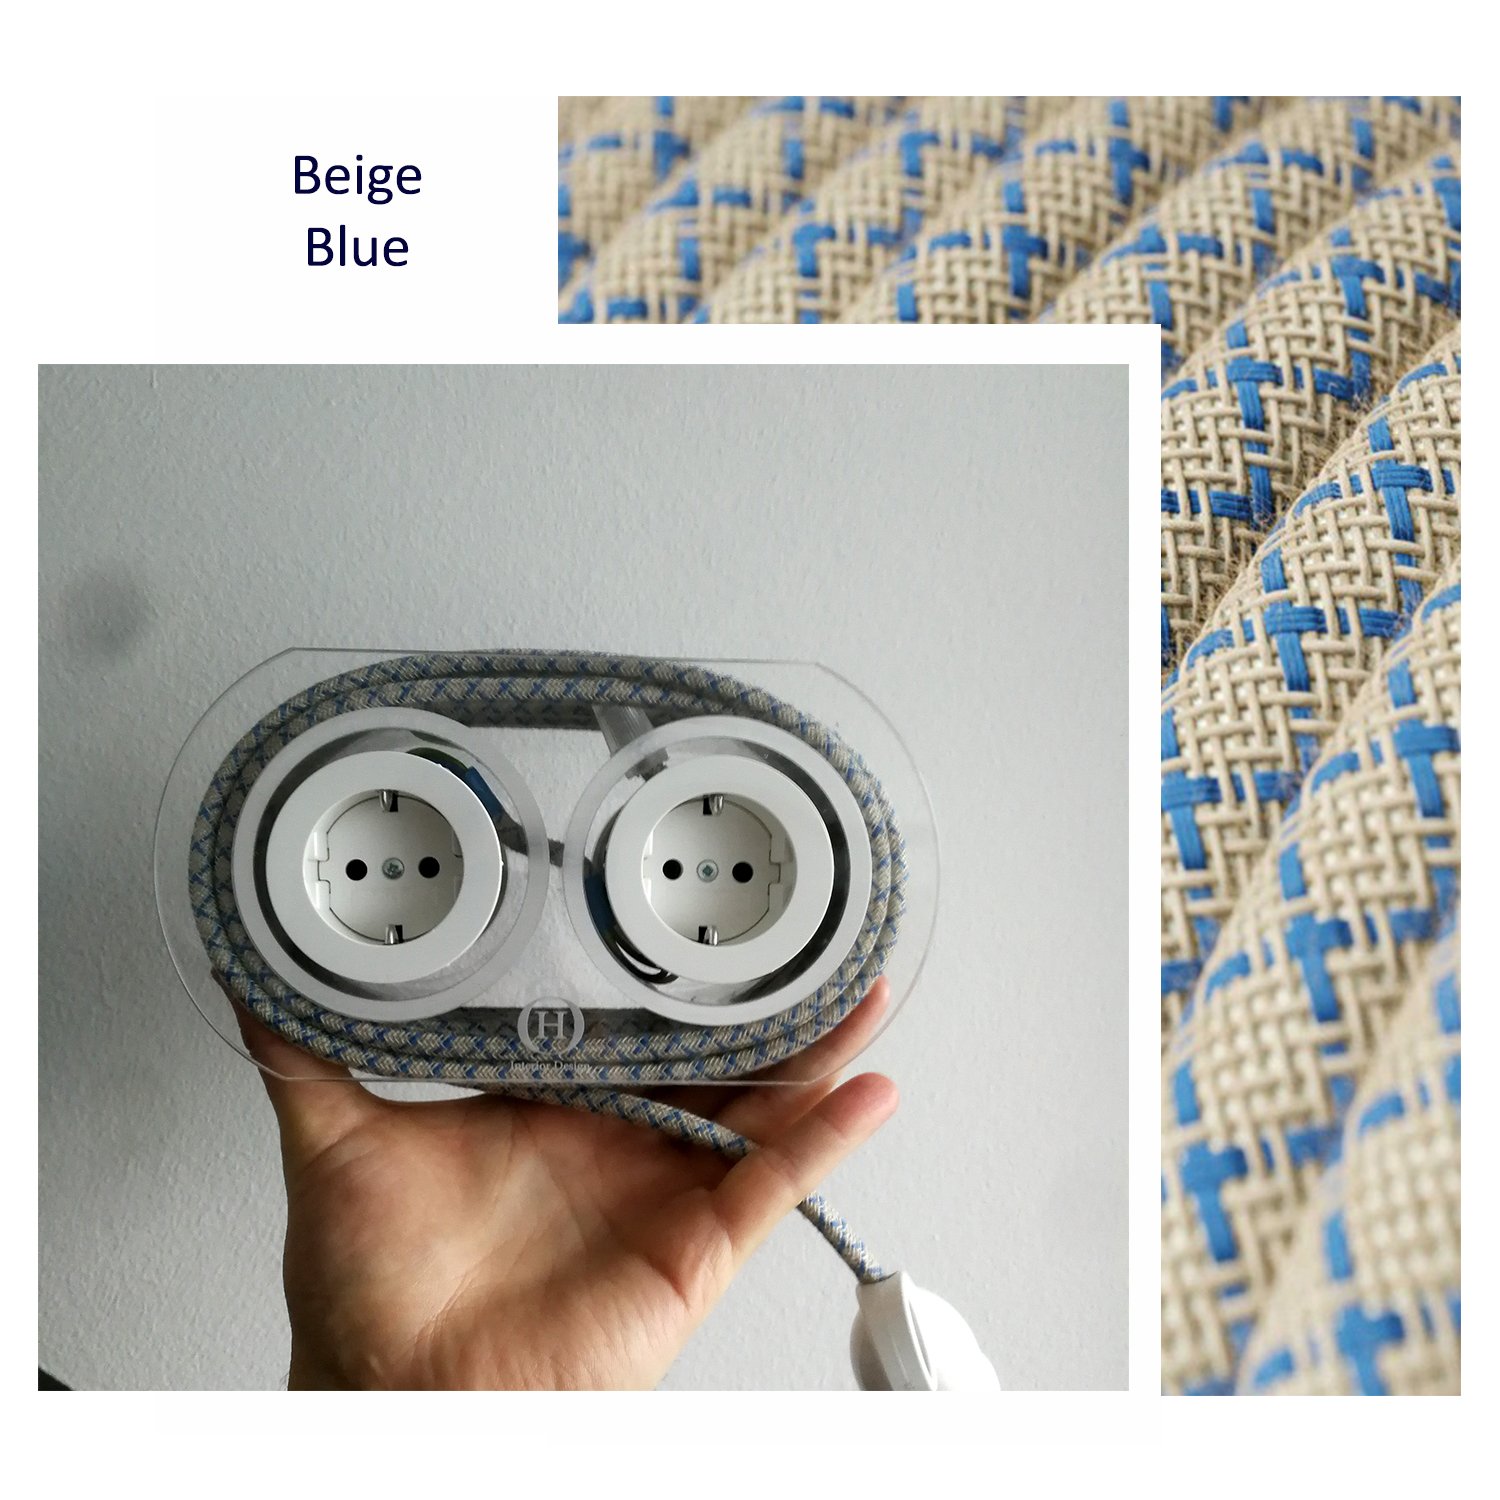 Extension Cord for 4 Plugs_Beige blue stripes_White plug.jpg